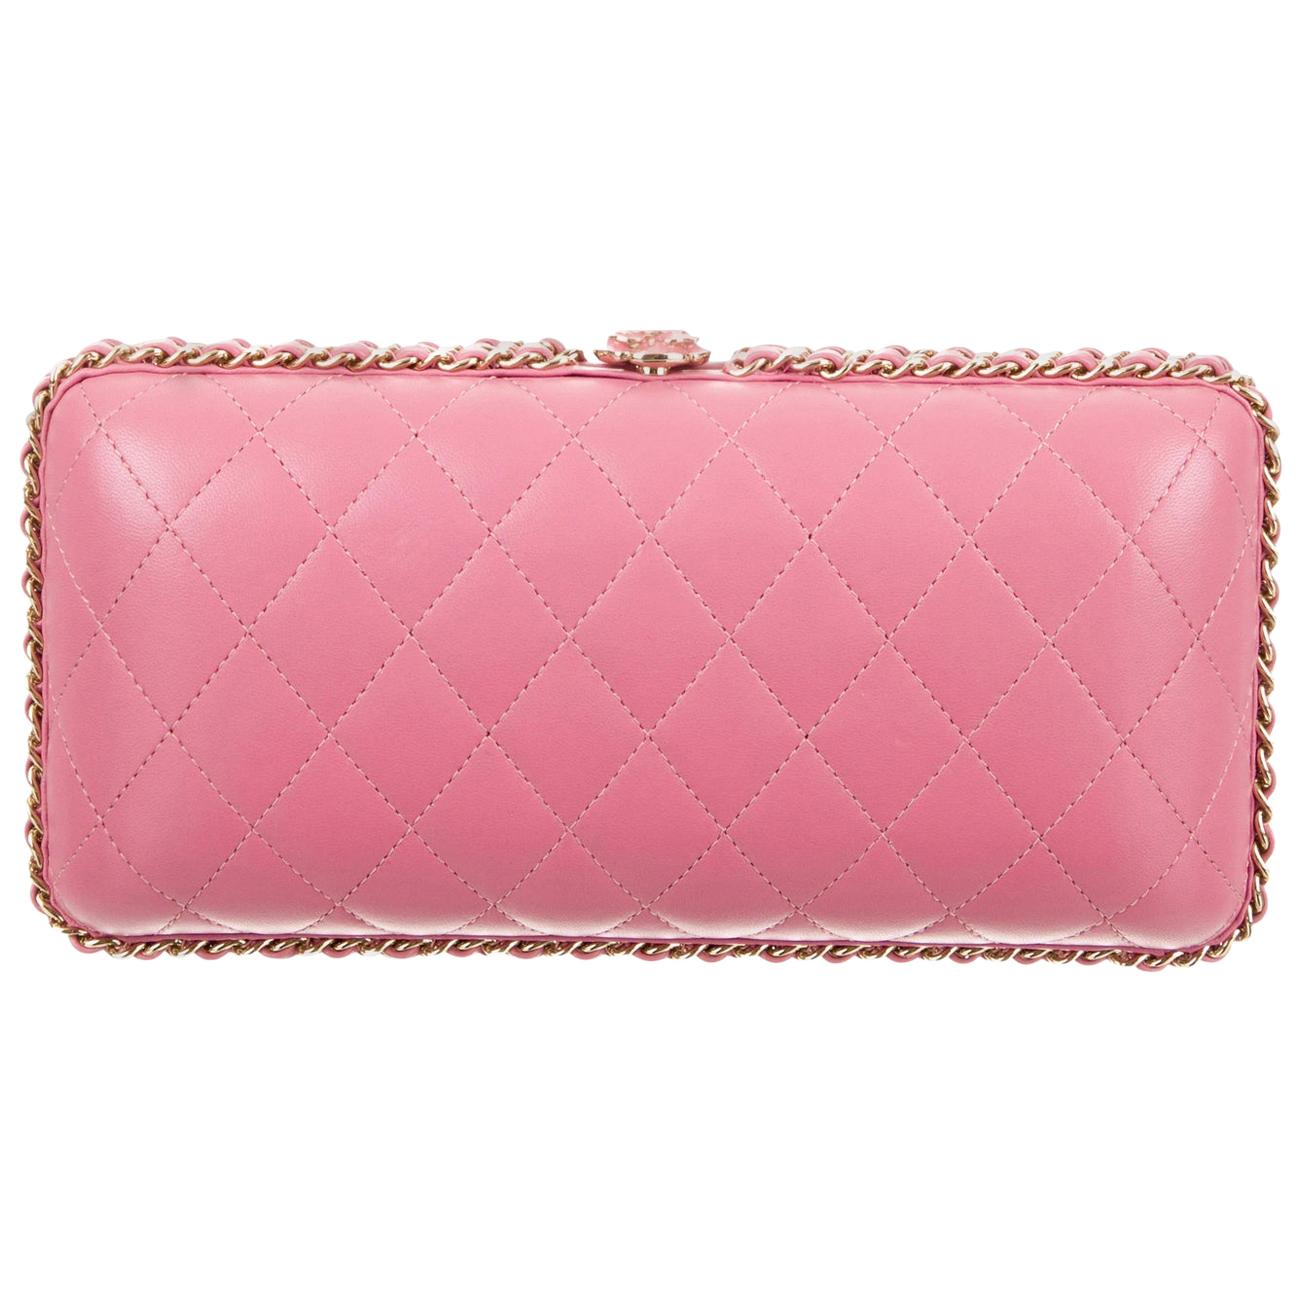 Chanel NEW Light Pink Leather Gold 2 in 1 Chain Evening Shoulder Clutch ...